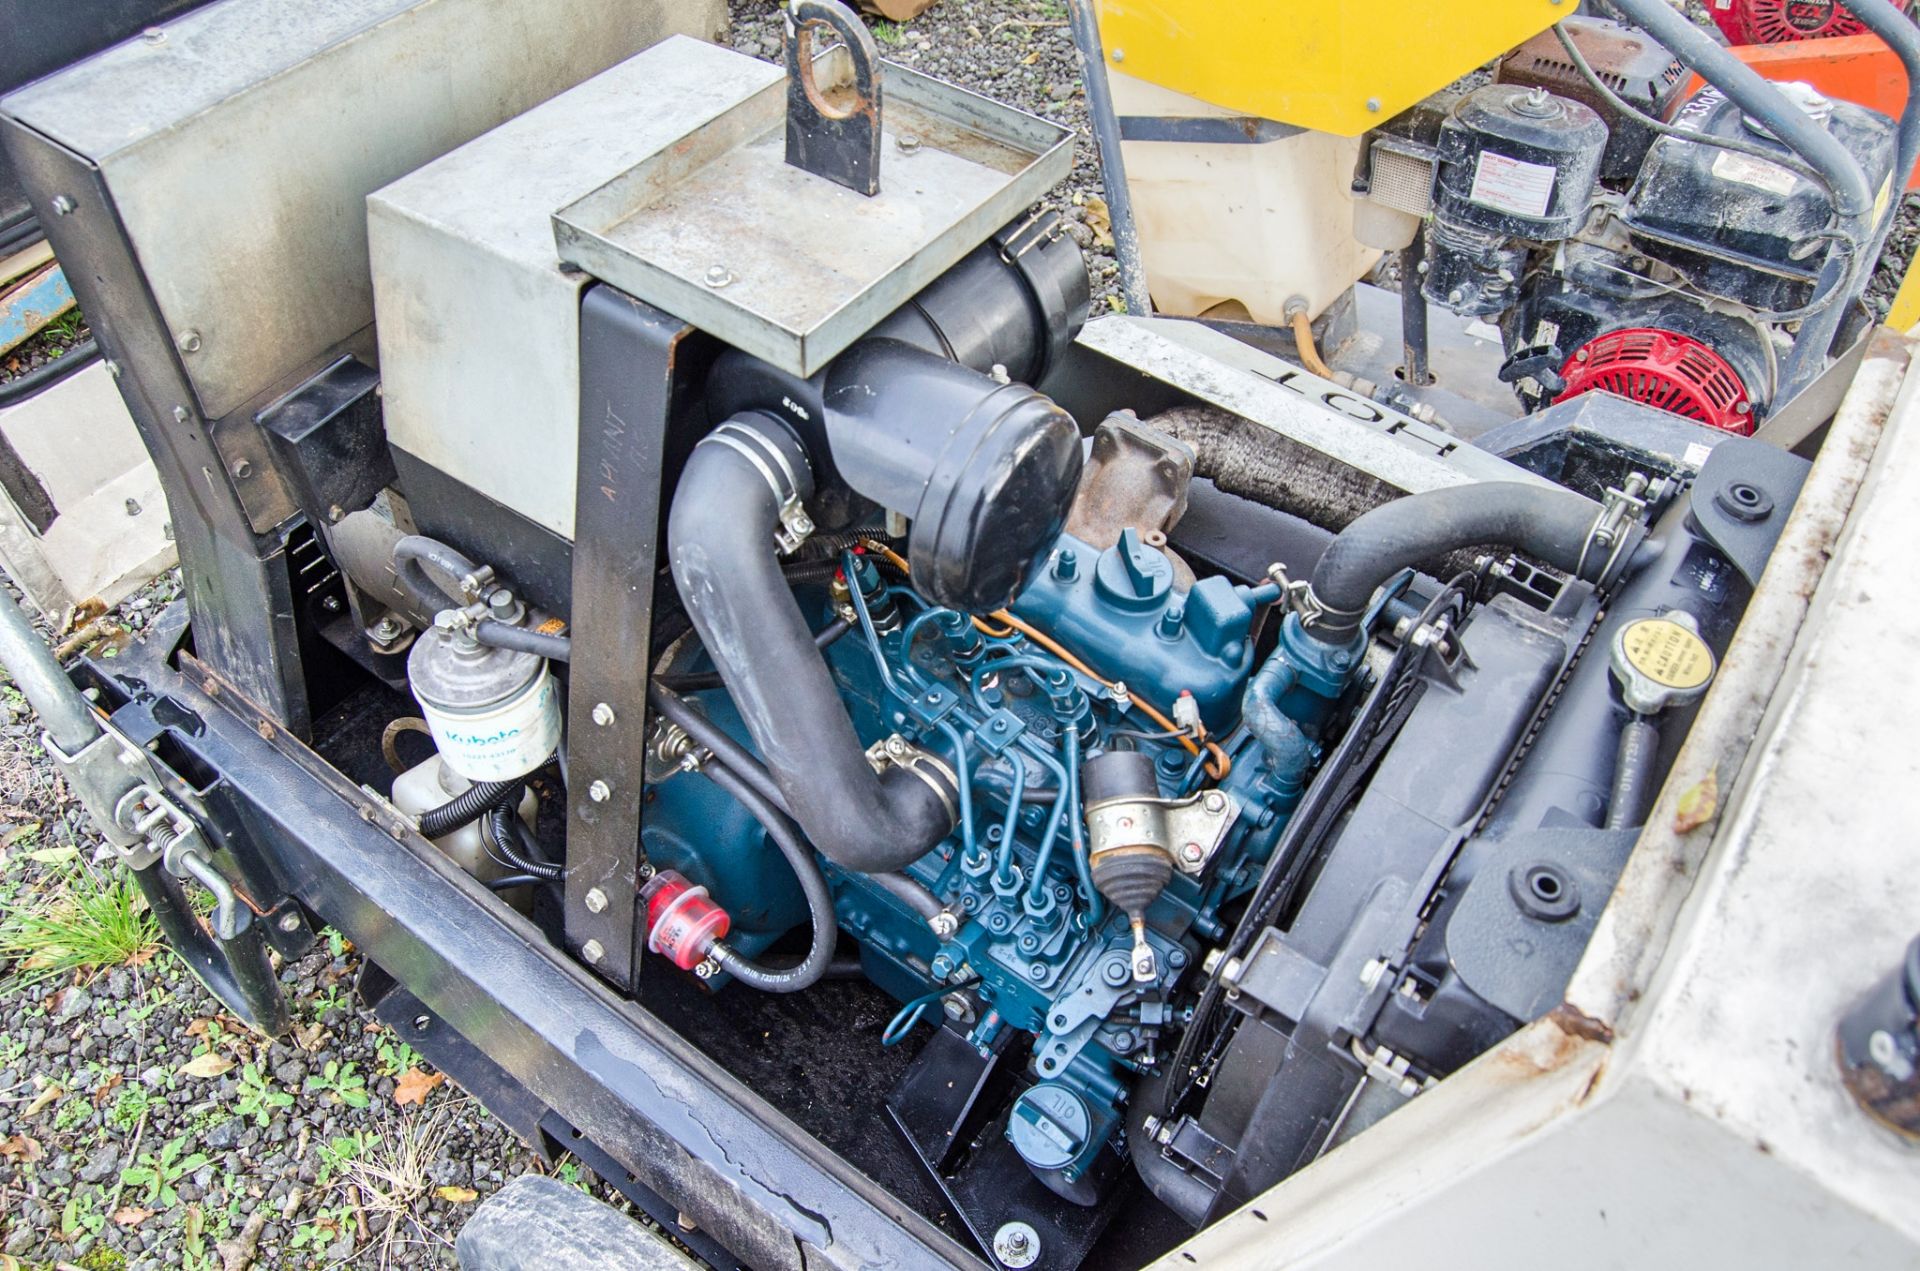 MHM MG1000-SSK-V diesel driven 10 kva generator S/N: 229190028 Recorded hours: 3484 A1088516 - Image 4 of 5